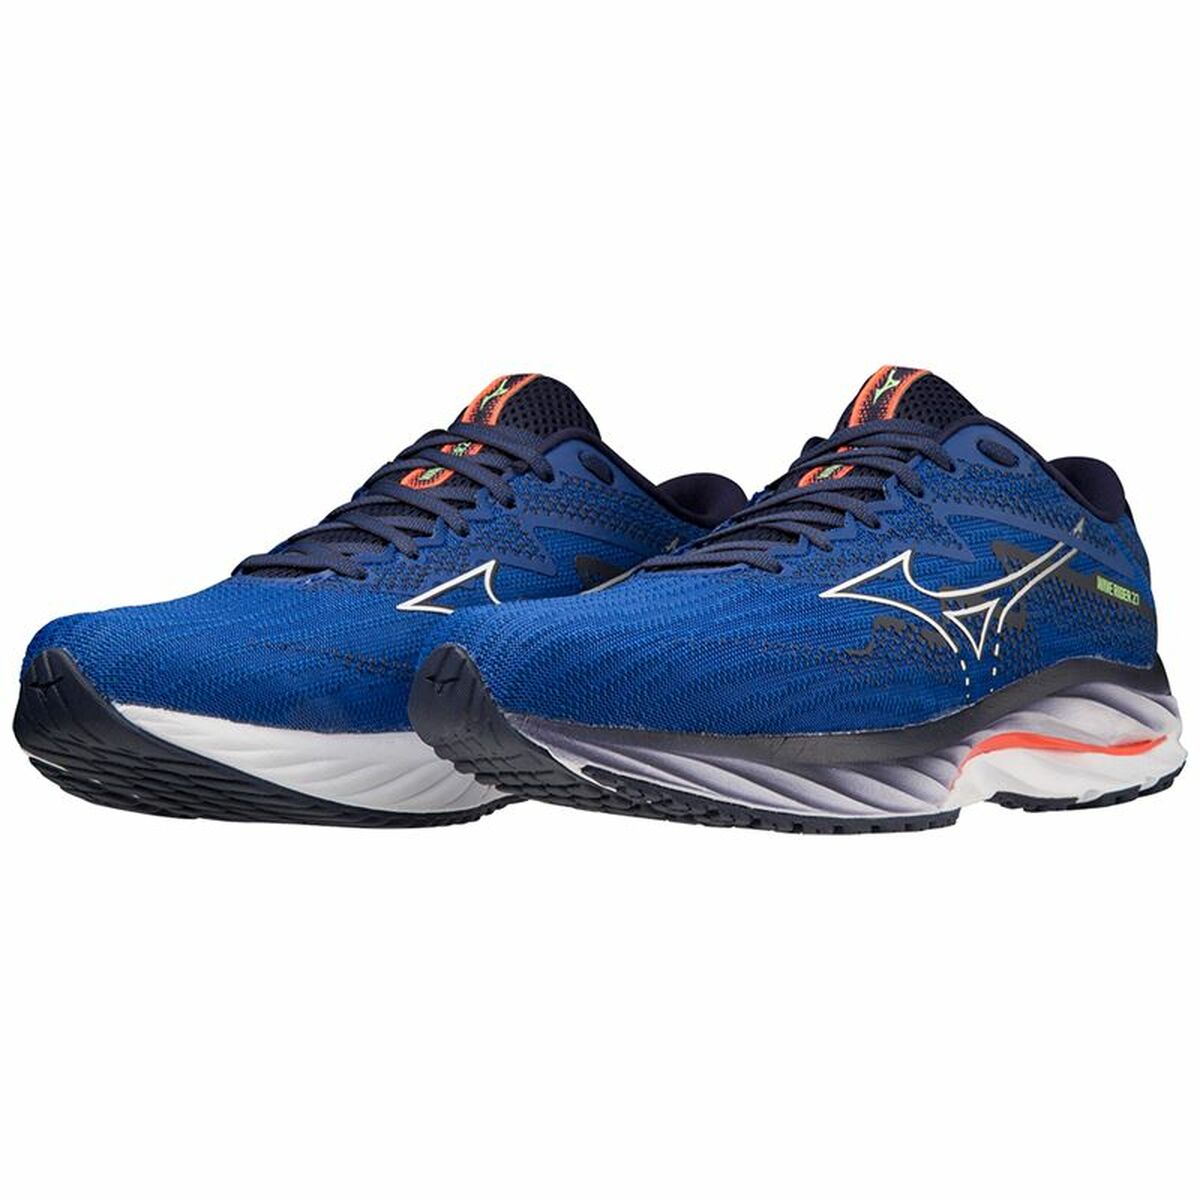 Running Shoes for Adults Mizuno Wave Rider 27 Blue Men